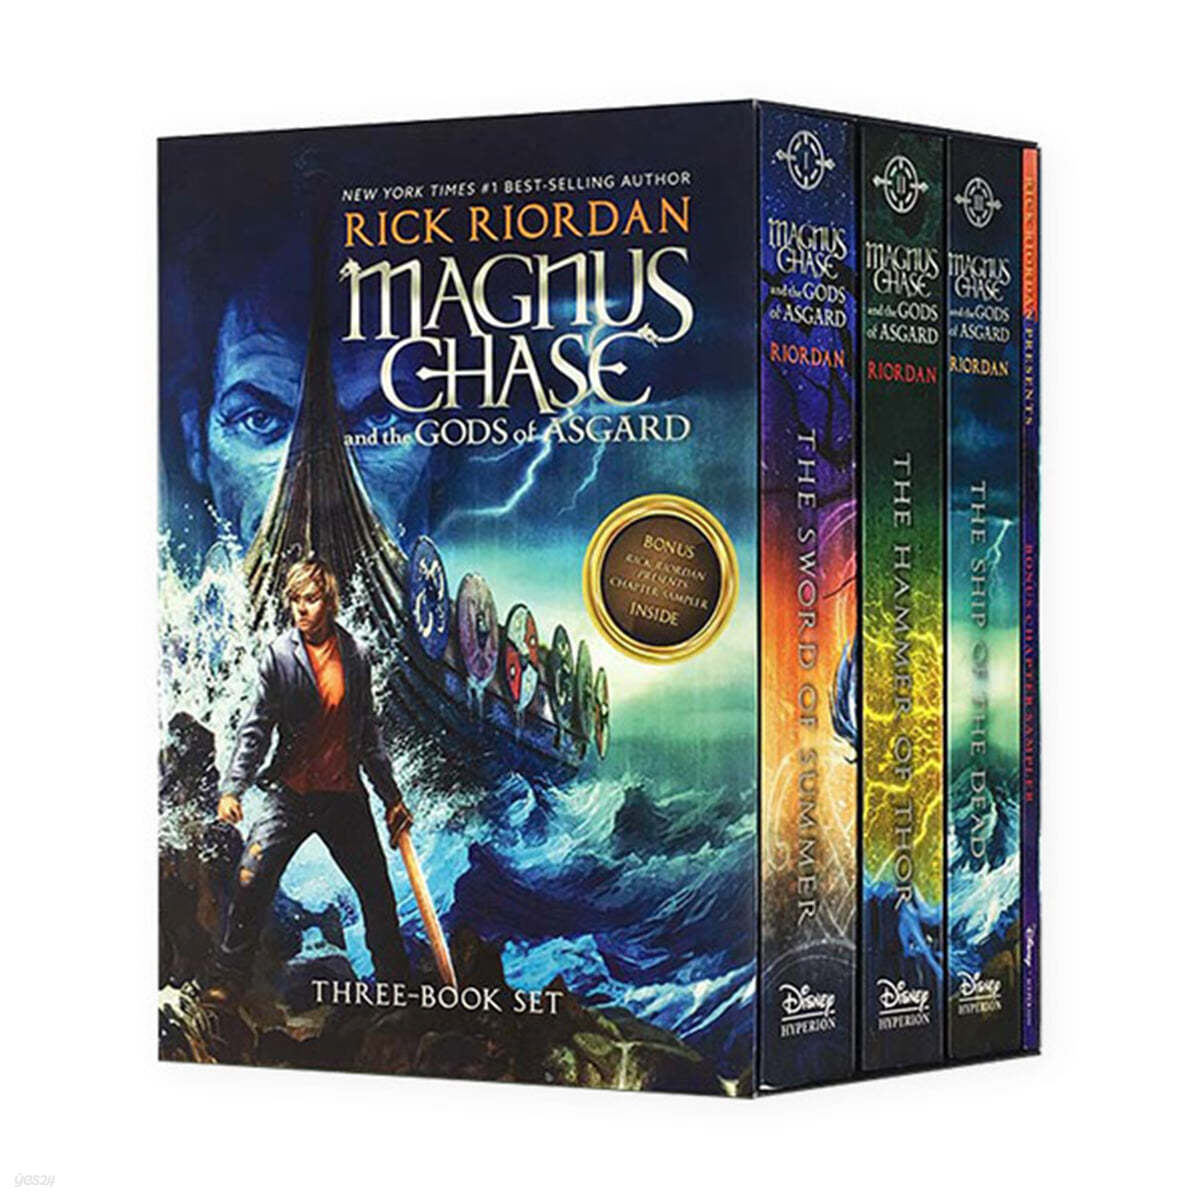 Magnus Chase and the Gods of Asgard #01-3 Books Boxed Set (The Sword of Summer / the Hammer of Thor / the Ship of the Dead / Bonus Chapter Sampler)